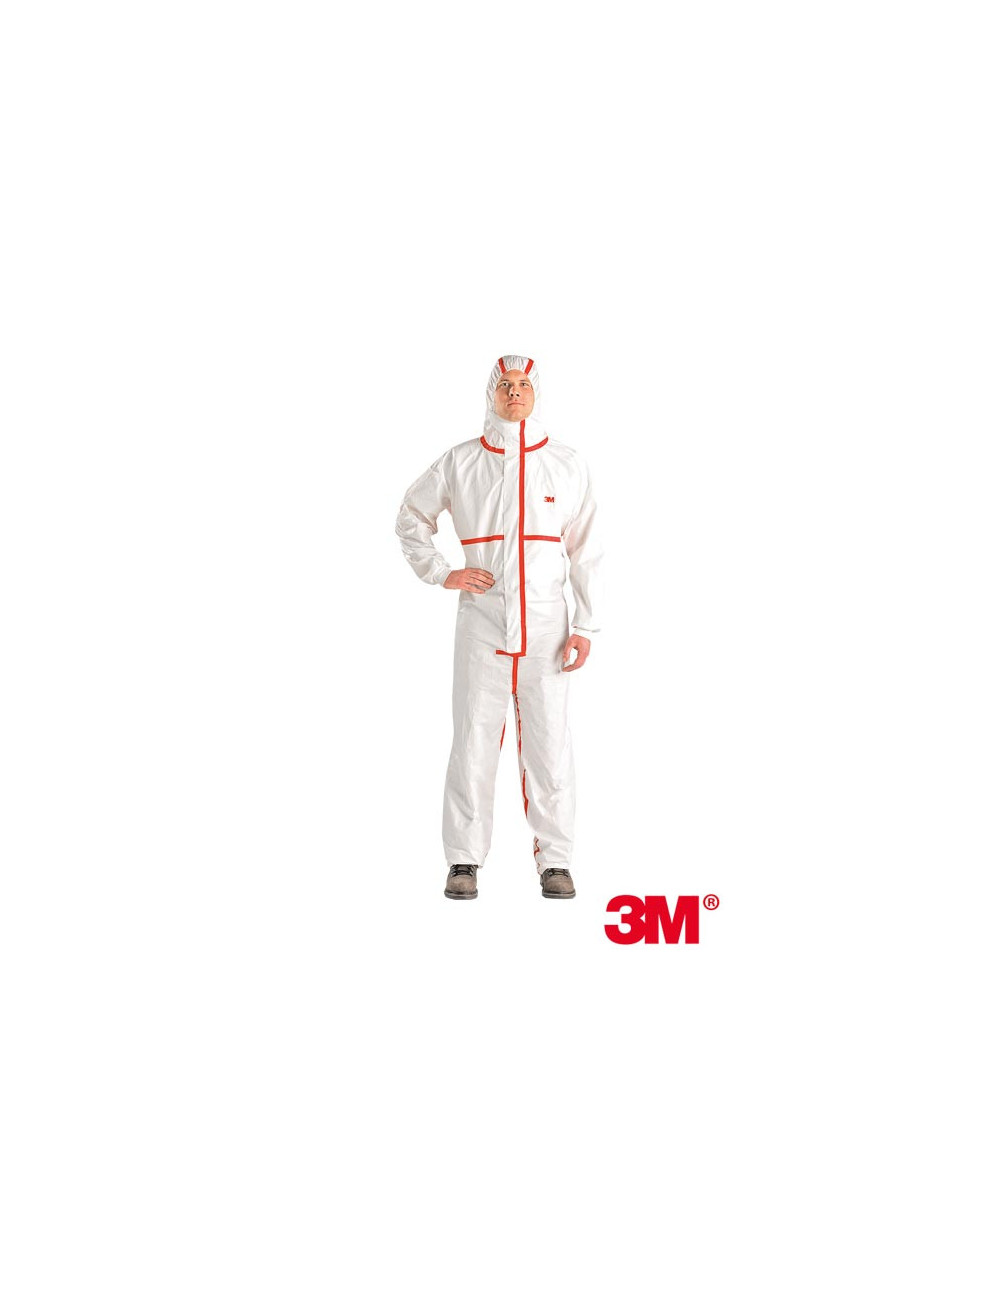 Protective suit wc white-red 3M 3m-kom-4565